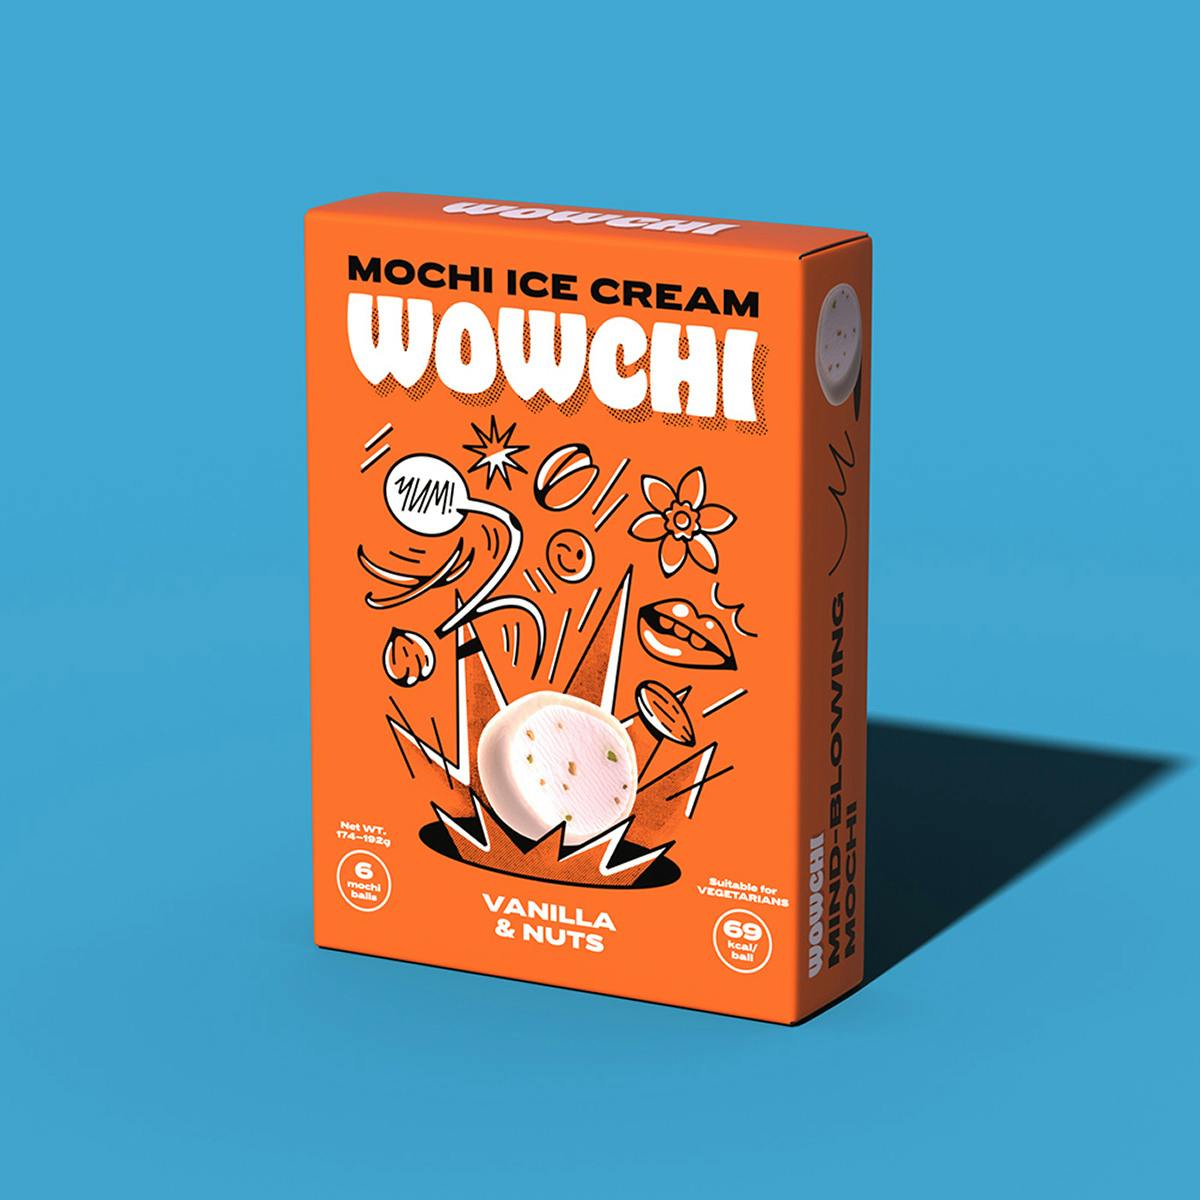 Image shows an orange box of Wowchi mochi with line illustrations and a picture of a mochi ball on the front, shown against a blue background